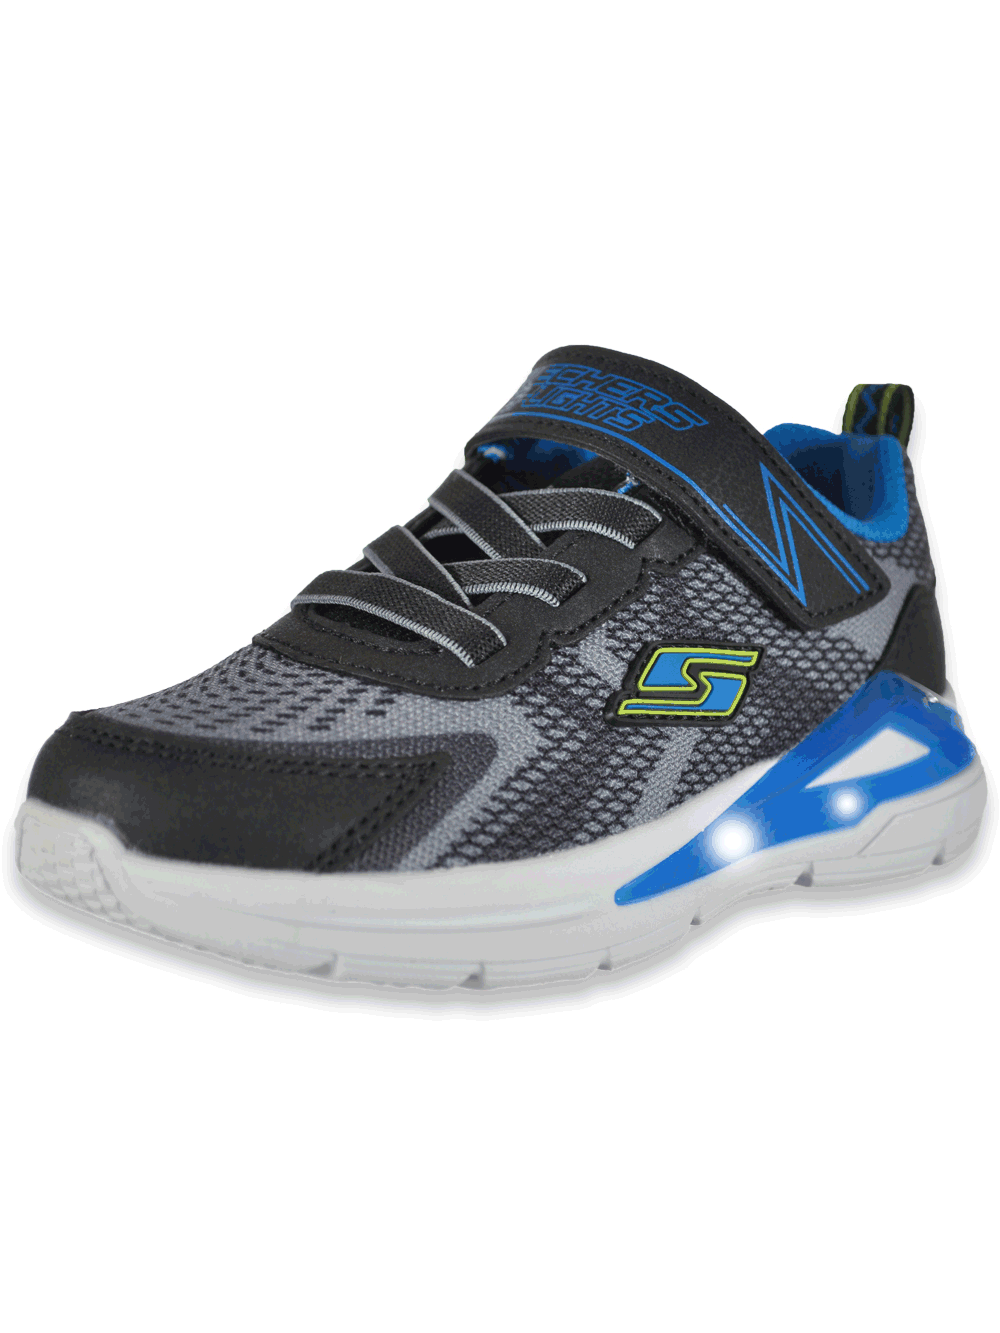 Skechers Kids Lights Velcro Trainer Blue/Turquoise 302754N/BLTQ – SM Shoes